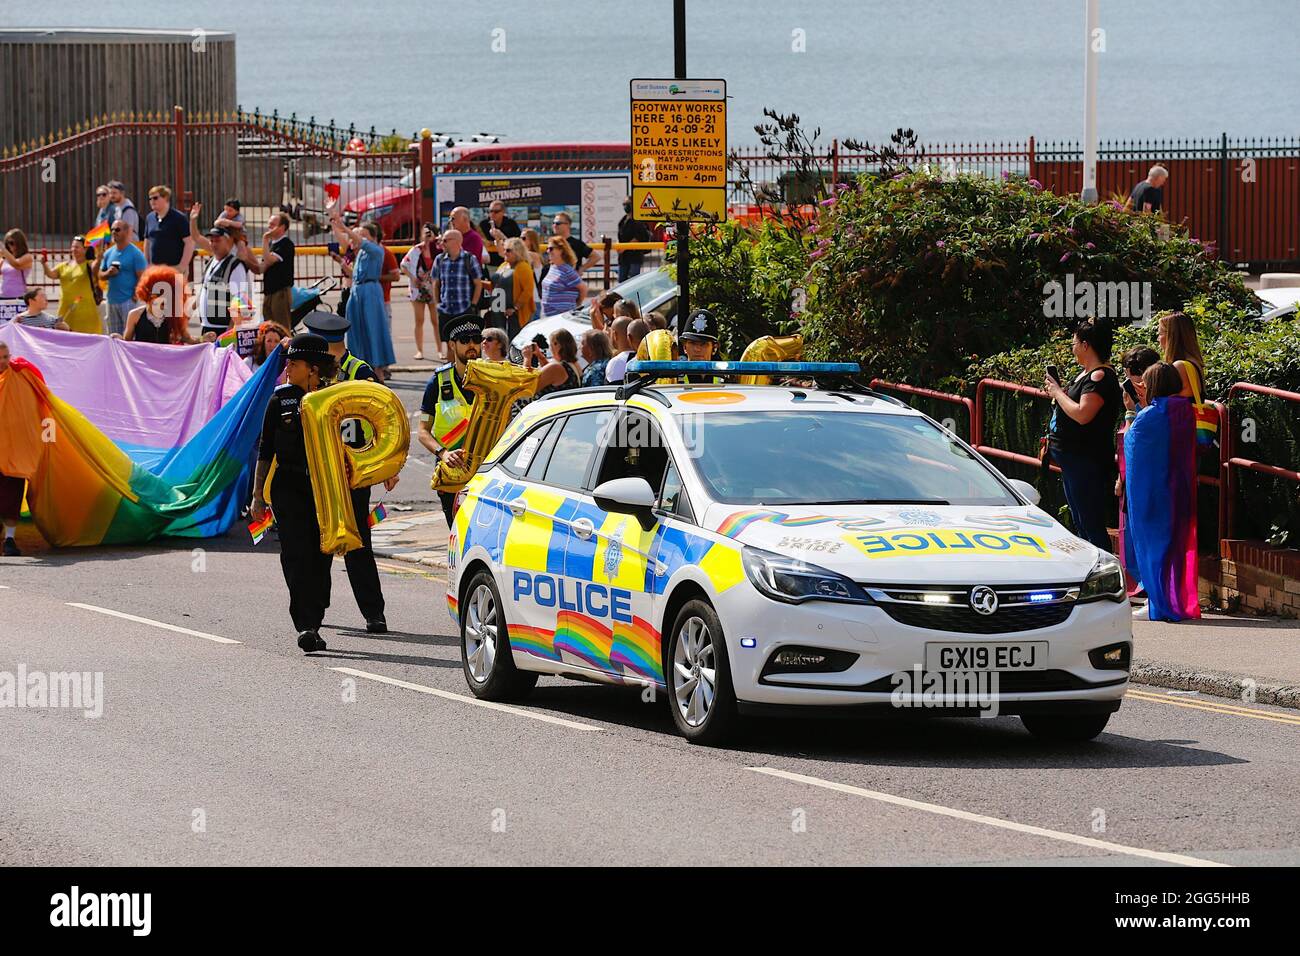 Hastings, East Sussex, UK. 29 August, 2021. The Pride parade 2021 returns to the seaside town of Hastings in East Sussex on the Bank holiday Sunday with the theme of Back to to the 80’s. Police car heads up the parade with with pride decals. Photo Credit: Paul Lawrenson /Alamy Live News Stock Photo